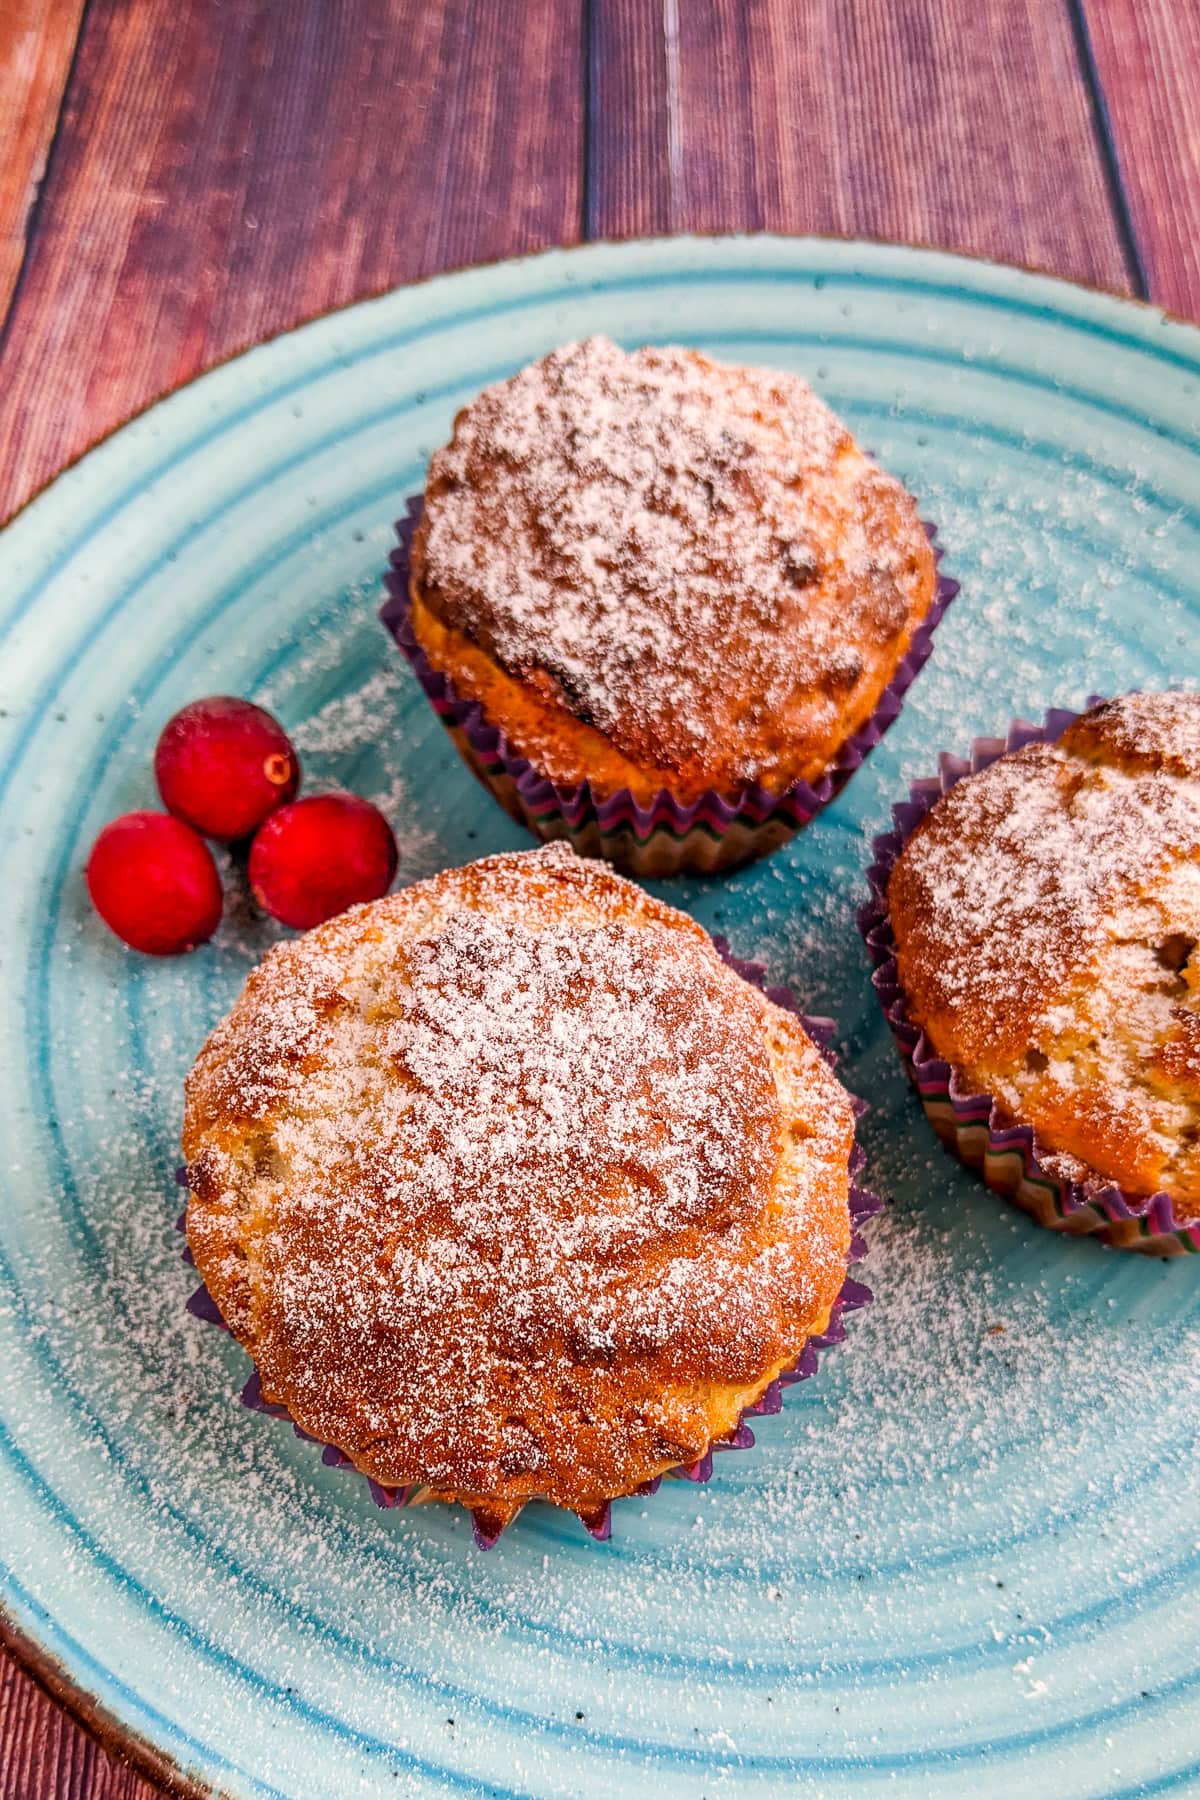 3 Banana muffins on a blue plate on a wooden table.